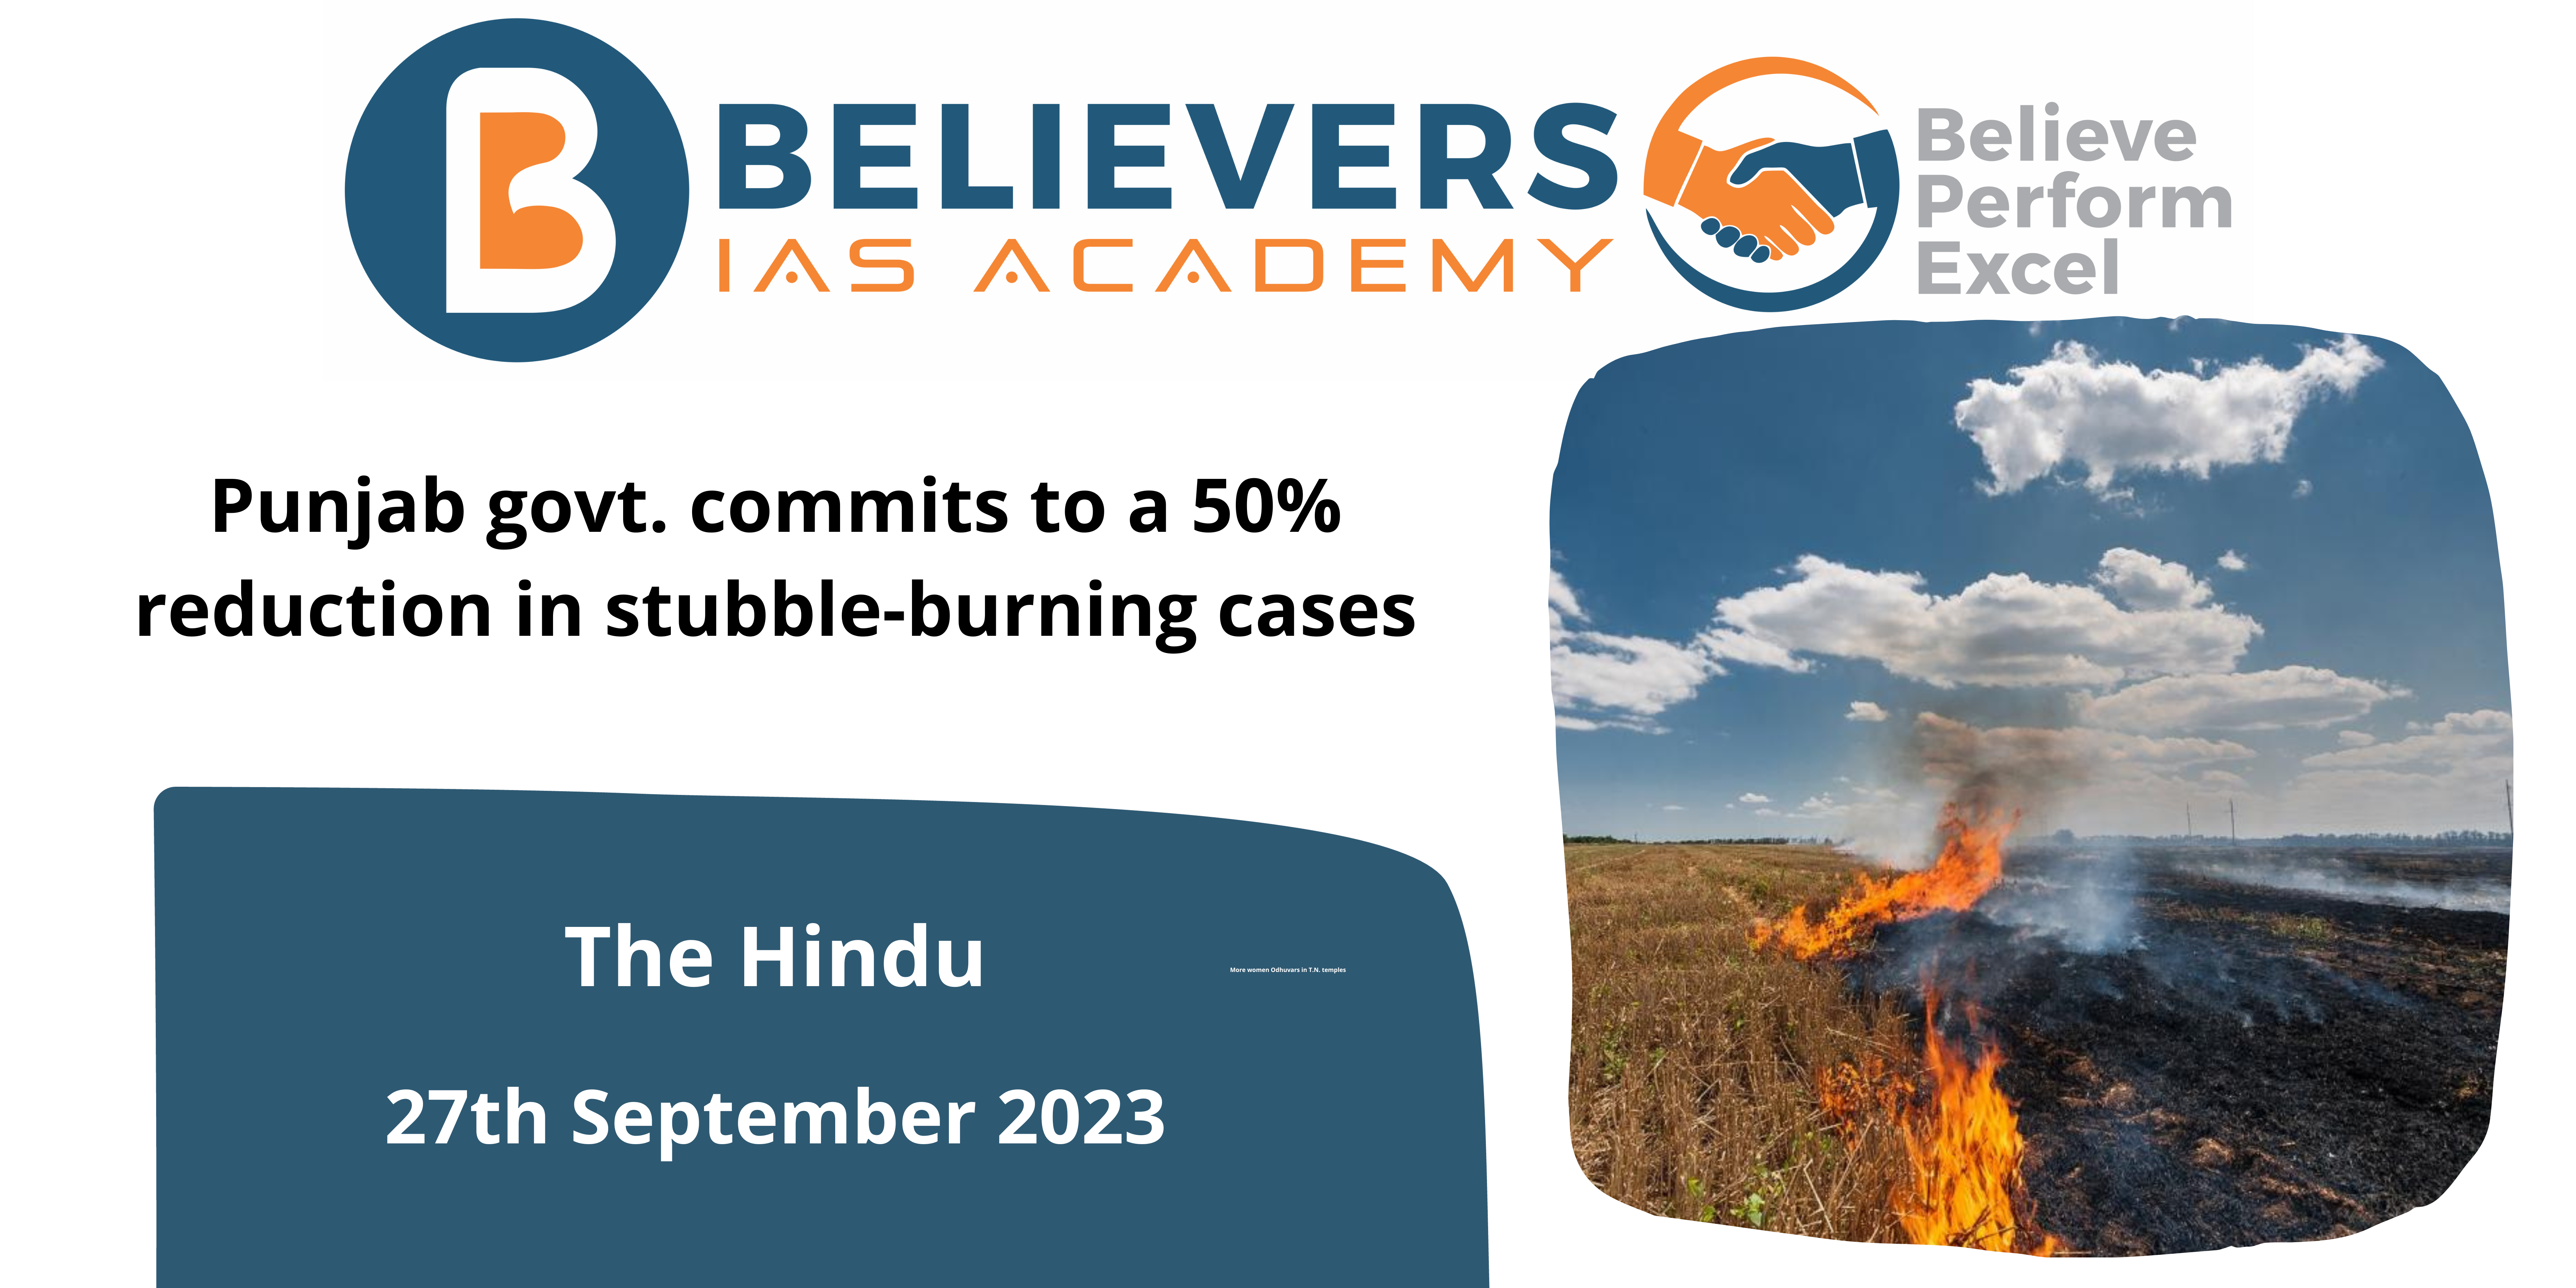 Punjab govt. commits to a 50% reduction in stubble-burning cases